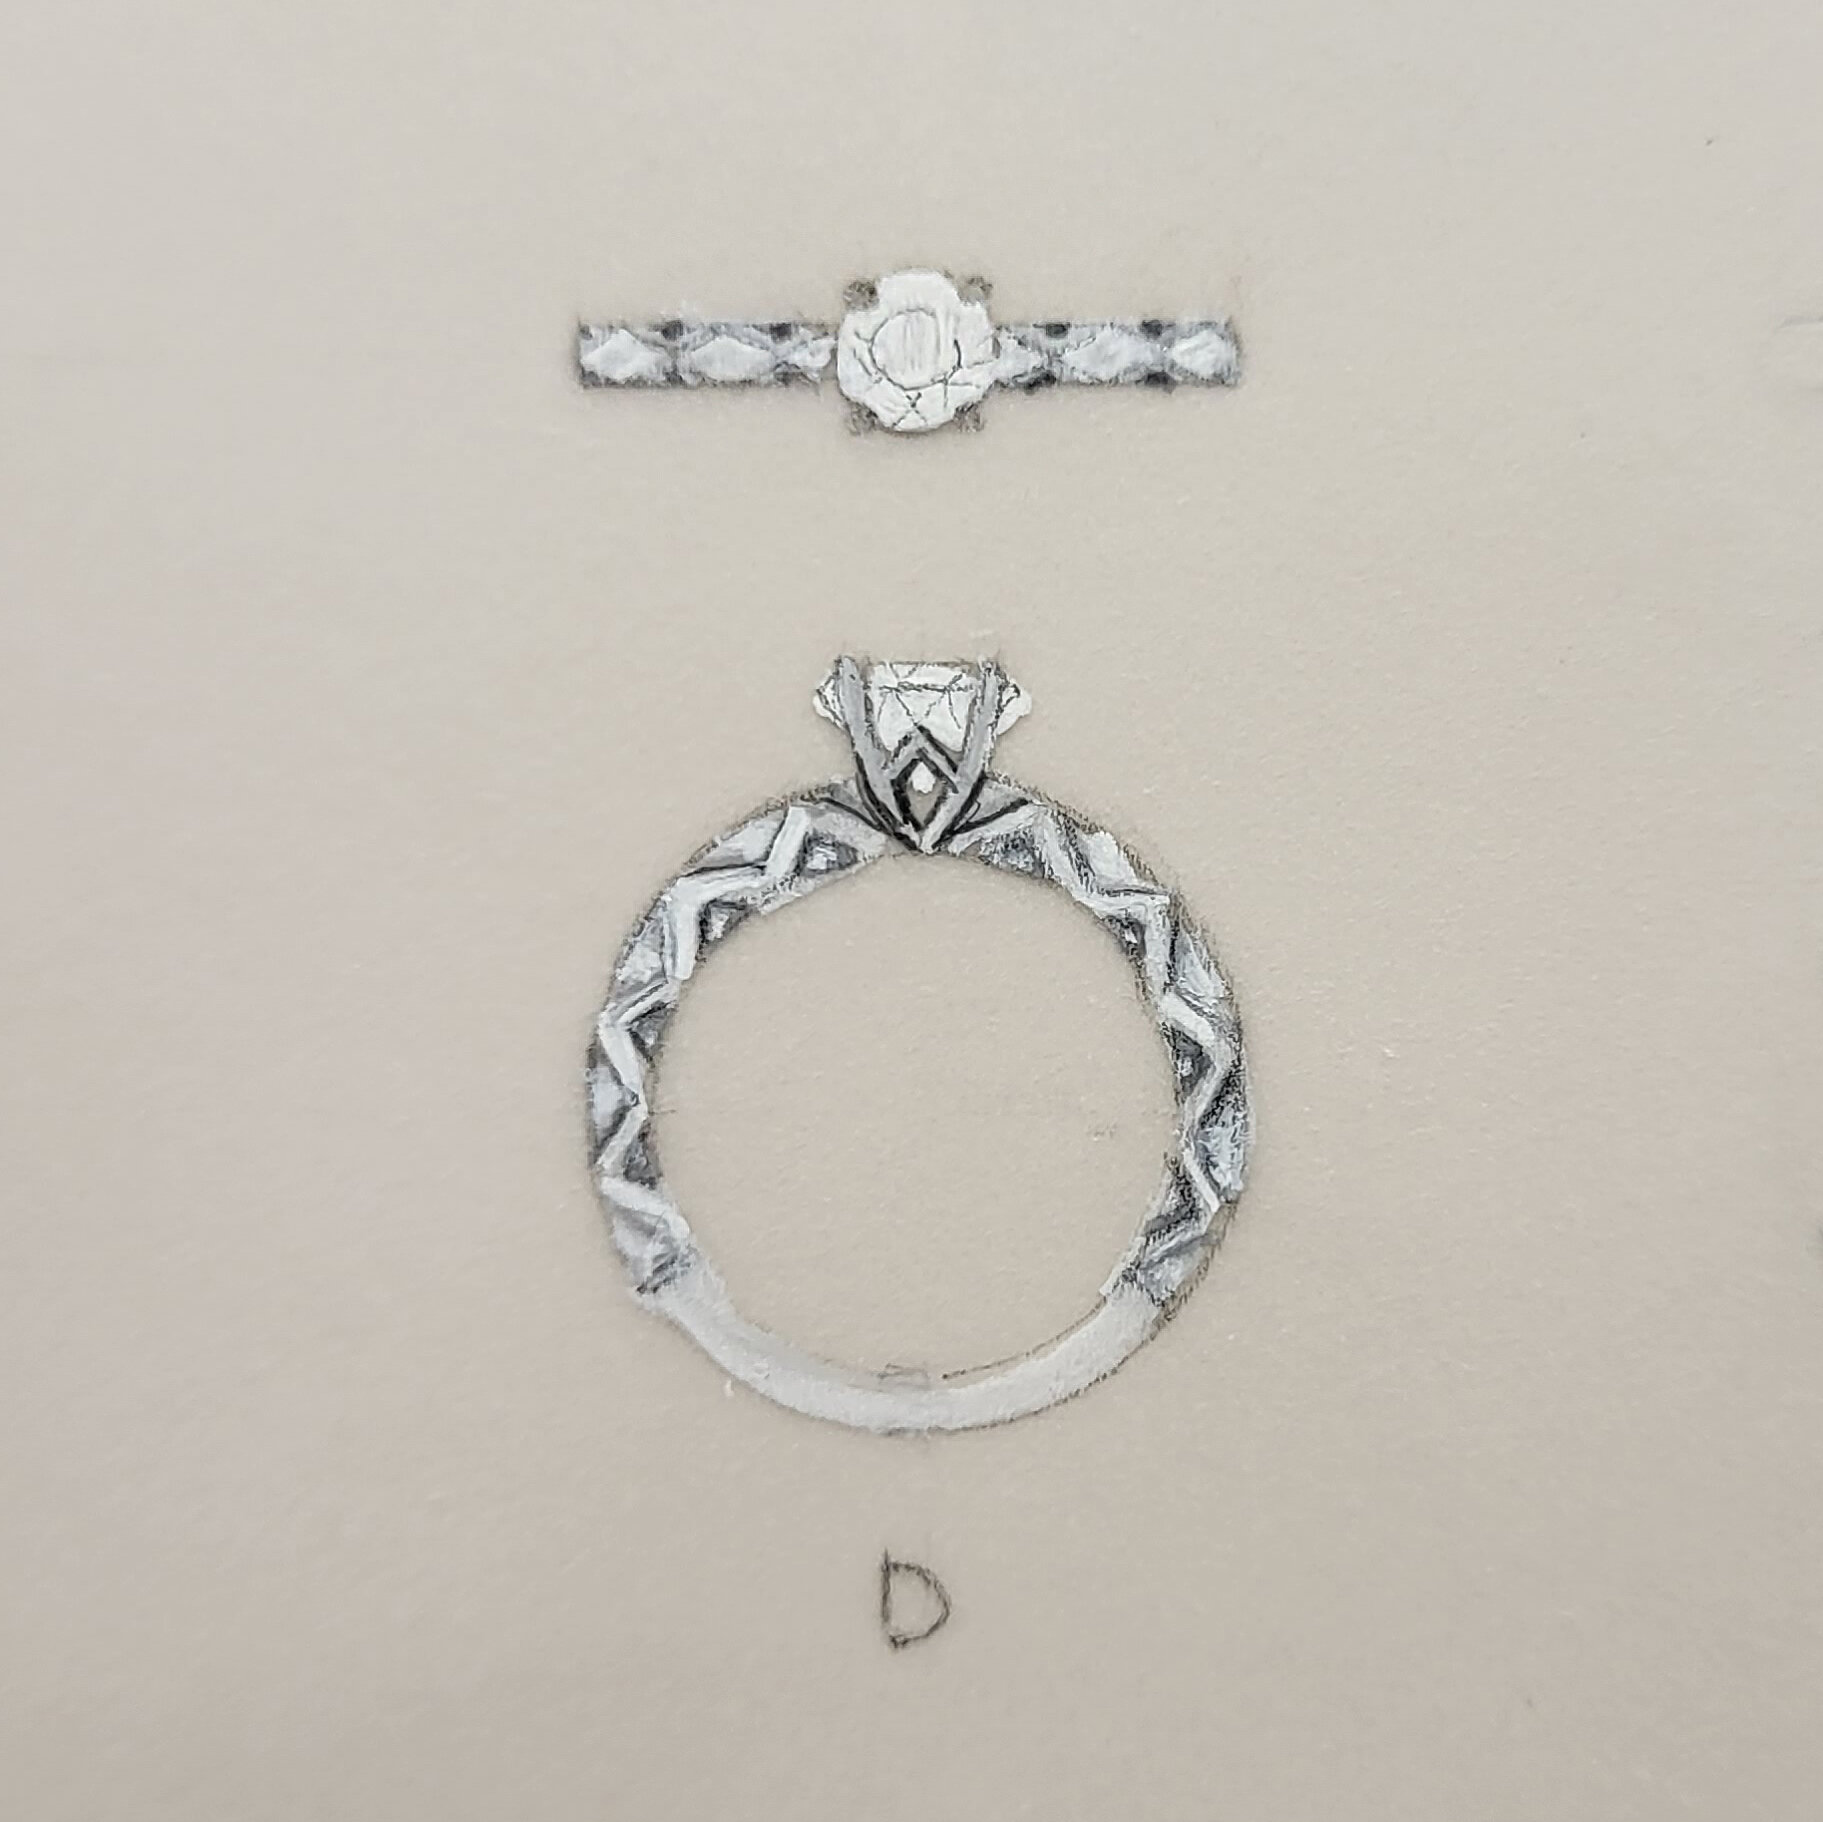 𝐼𝑡'𝑠 𝑎𝑙𝑙 𝑖𝑛 𝑡ℎ𝑒 𝑑𝑒𝑡𝑎𝑖𝑙
💍
A close-up look at one of my sketches for a beautiful ring design. As you can see, it is not just the stone that can be the star of the show. 

The ring band itself can carry some amazing detail that will mak